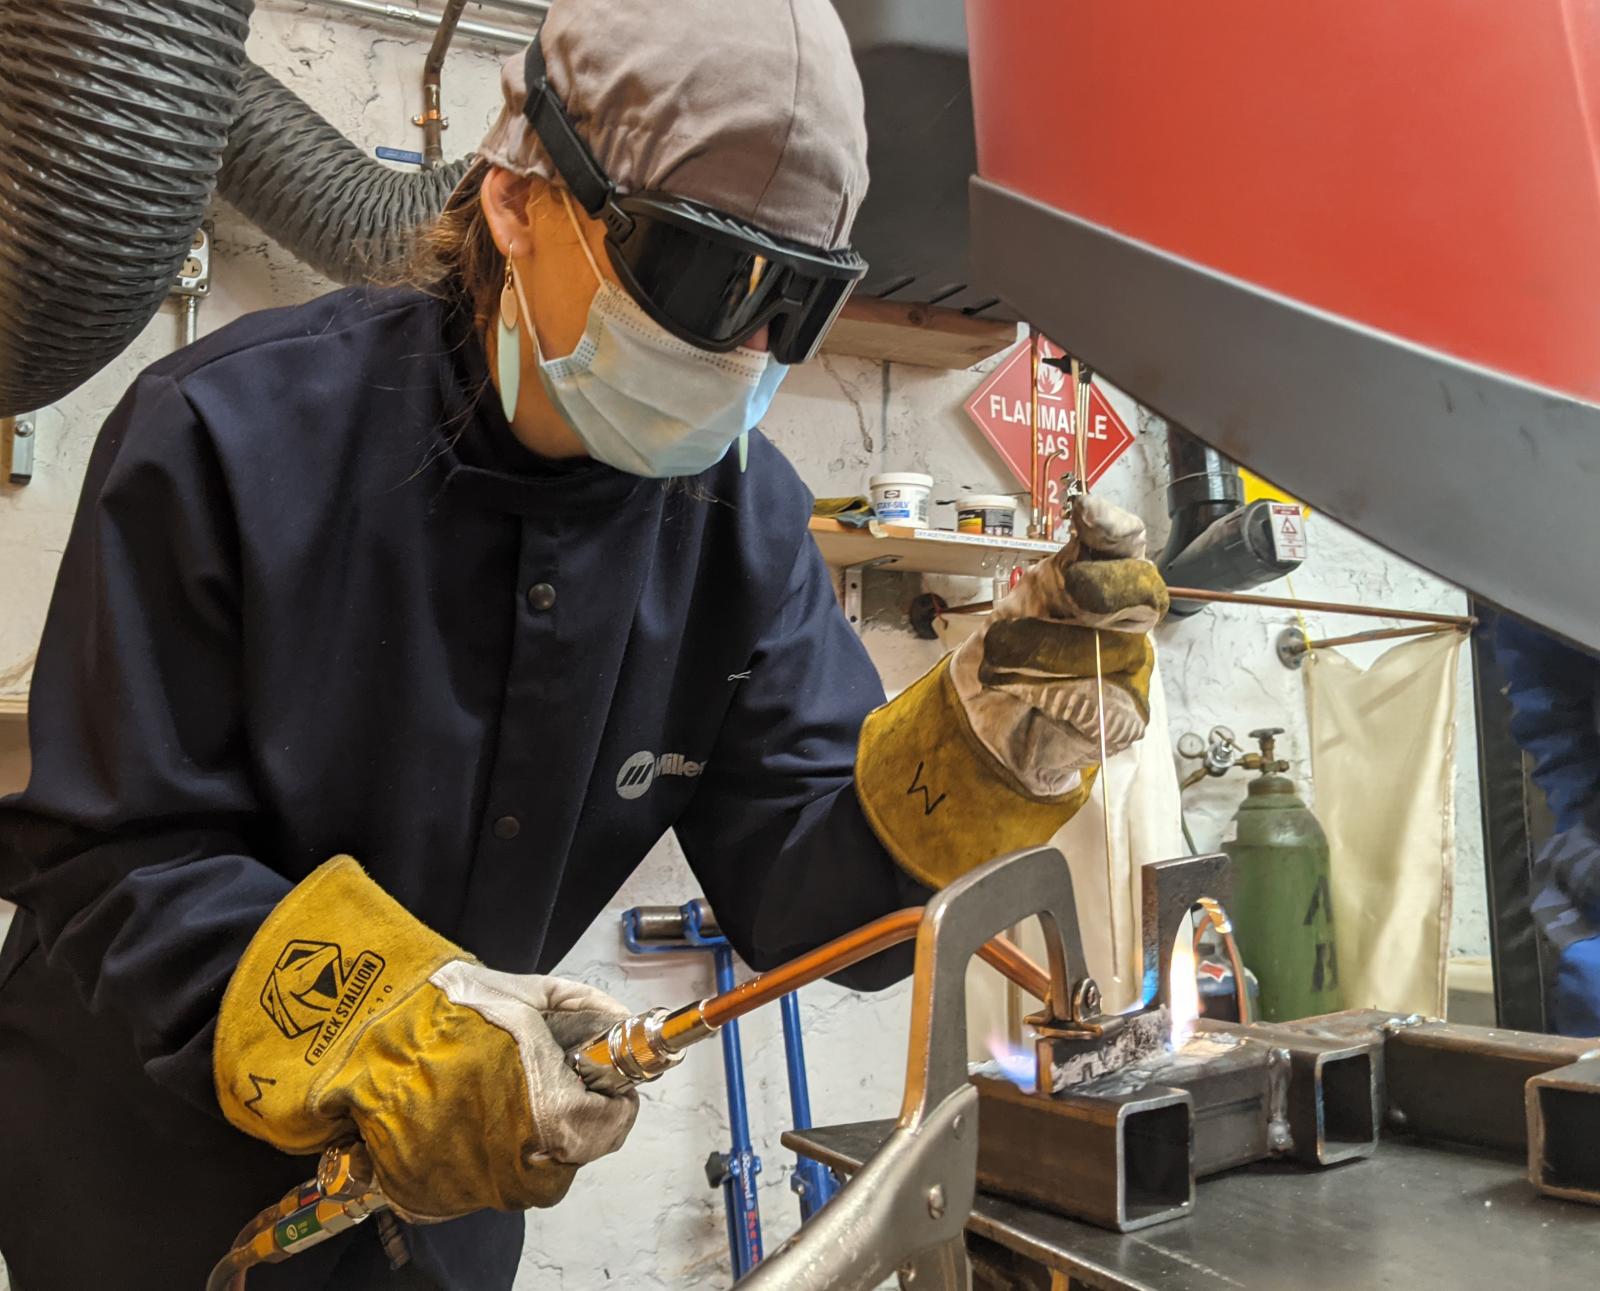 A MakeHaven member wearing her mask and other PPE welds